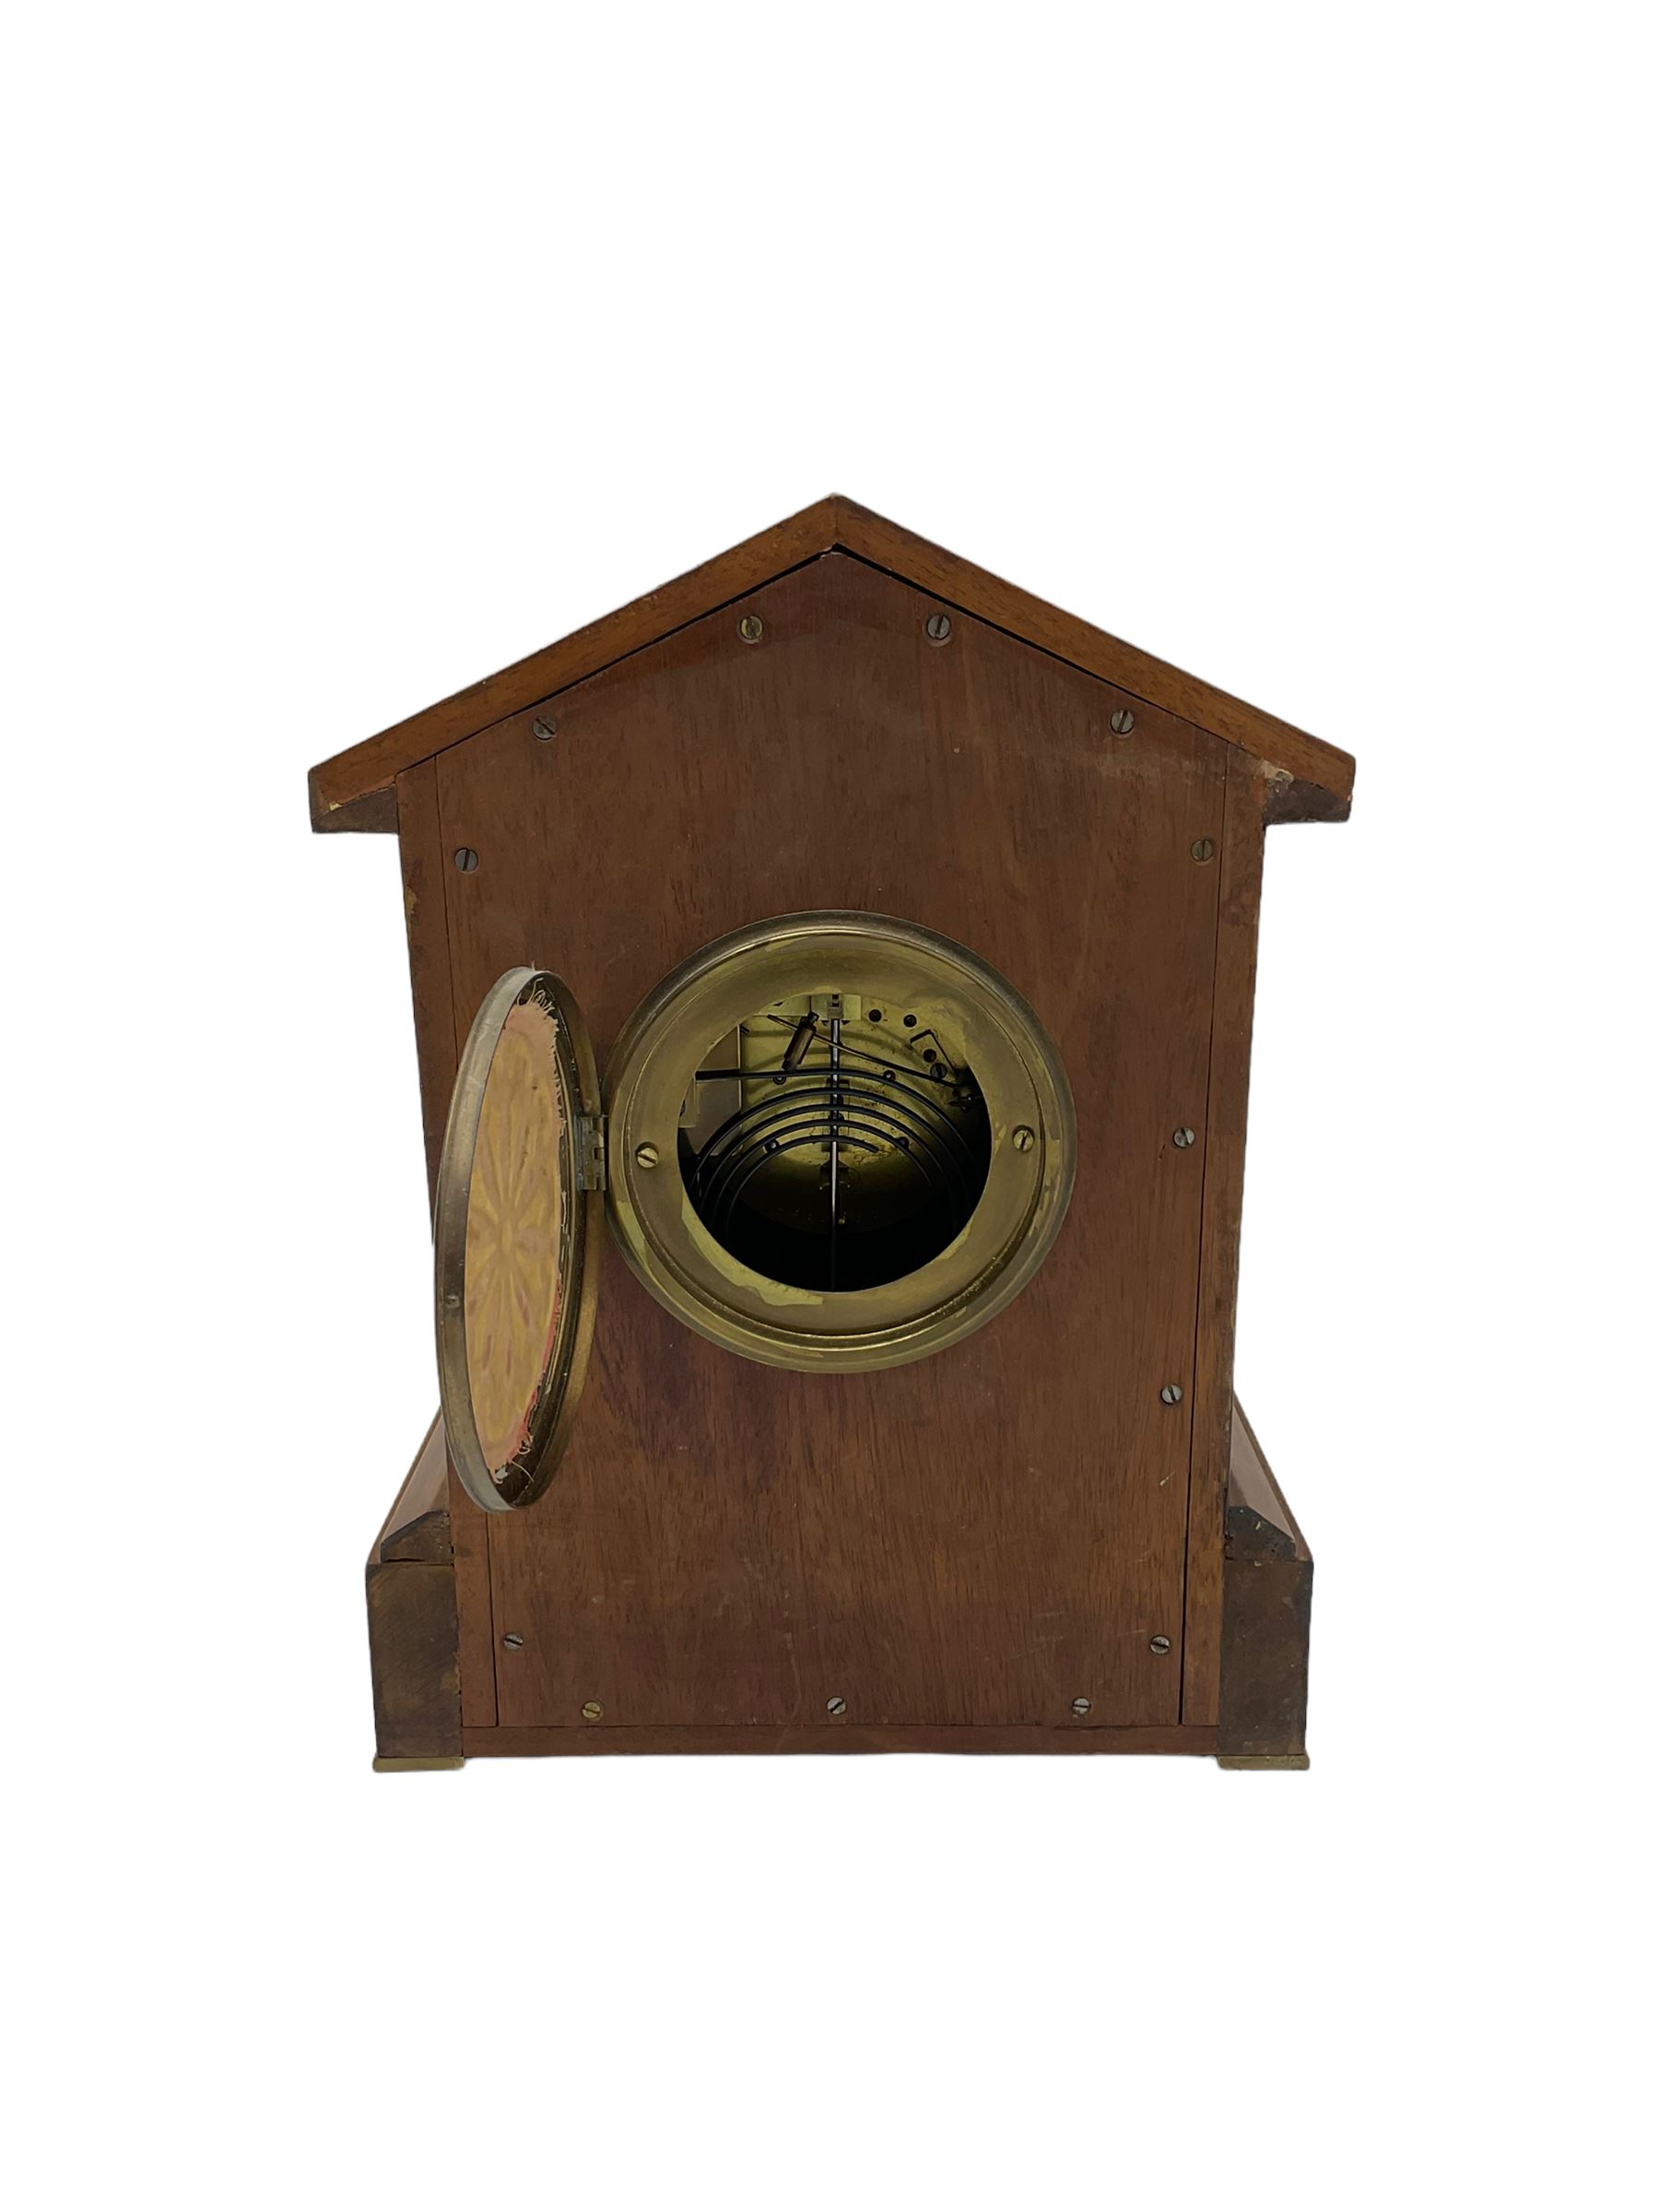 Mahogany cased mantle clock in a bespoke 20th century case with an architectural pediment and recess - Image 3 of 3